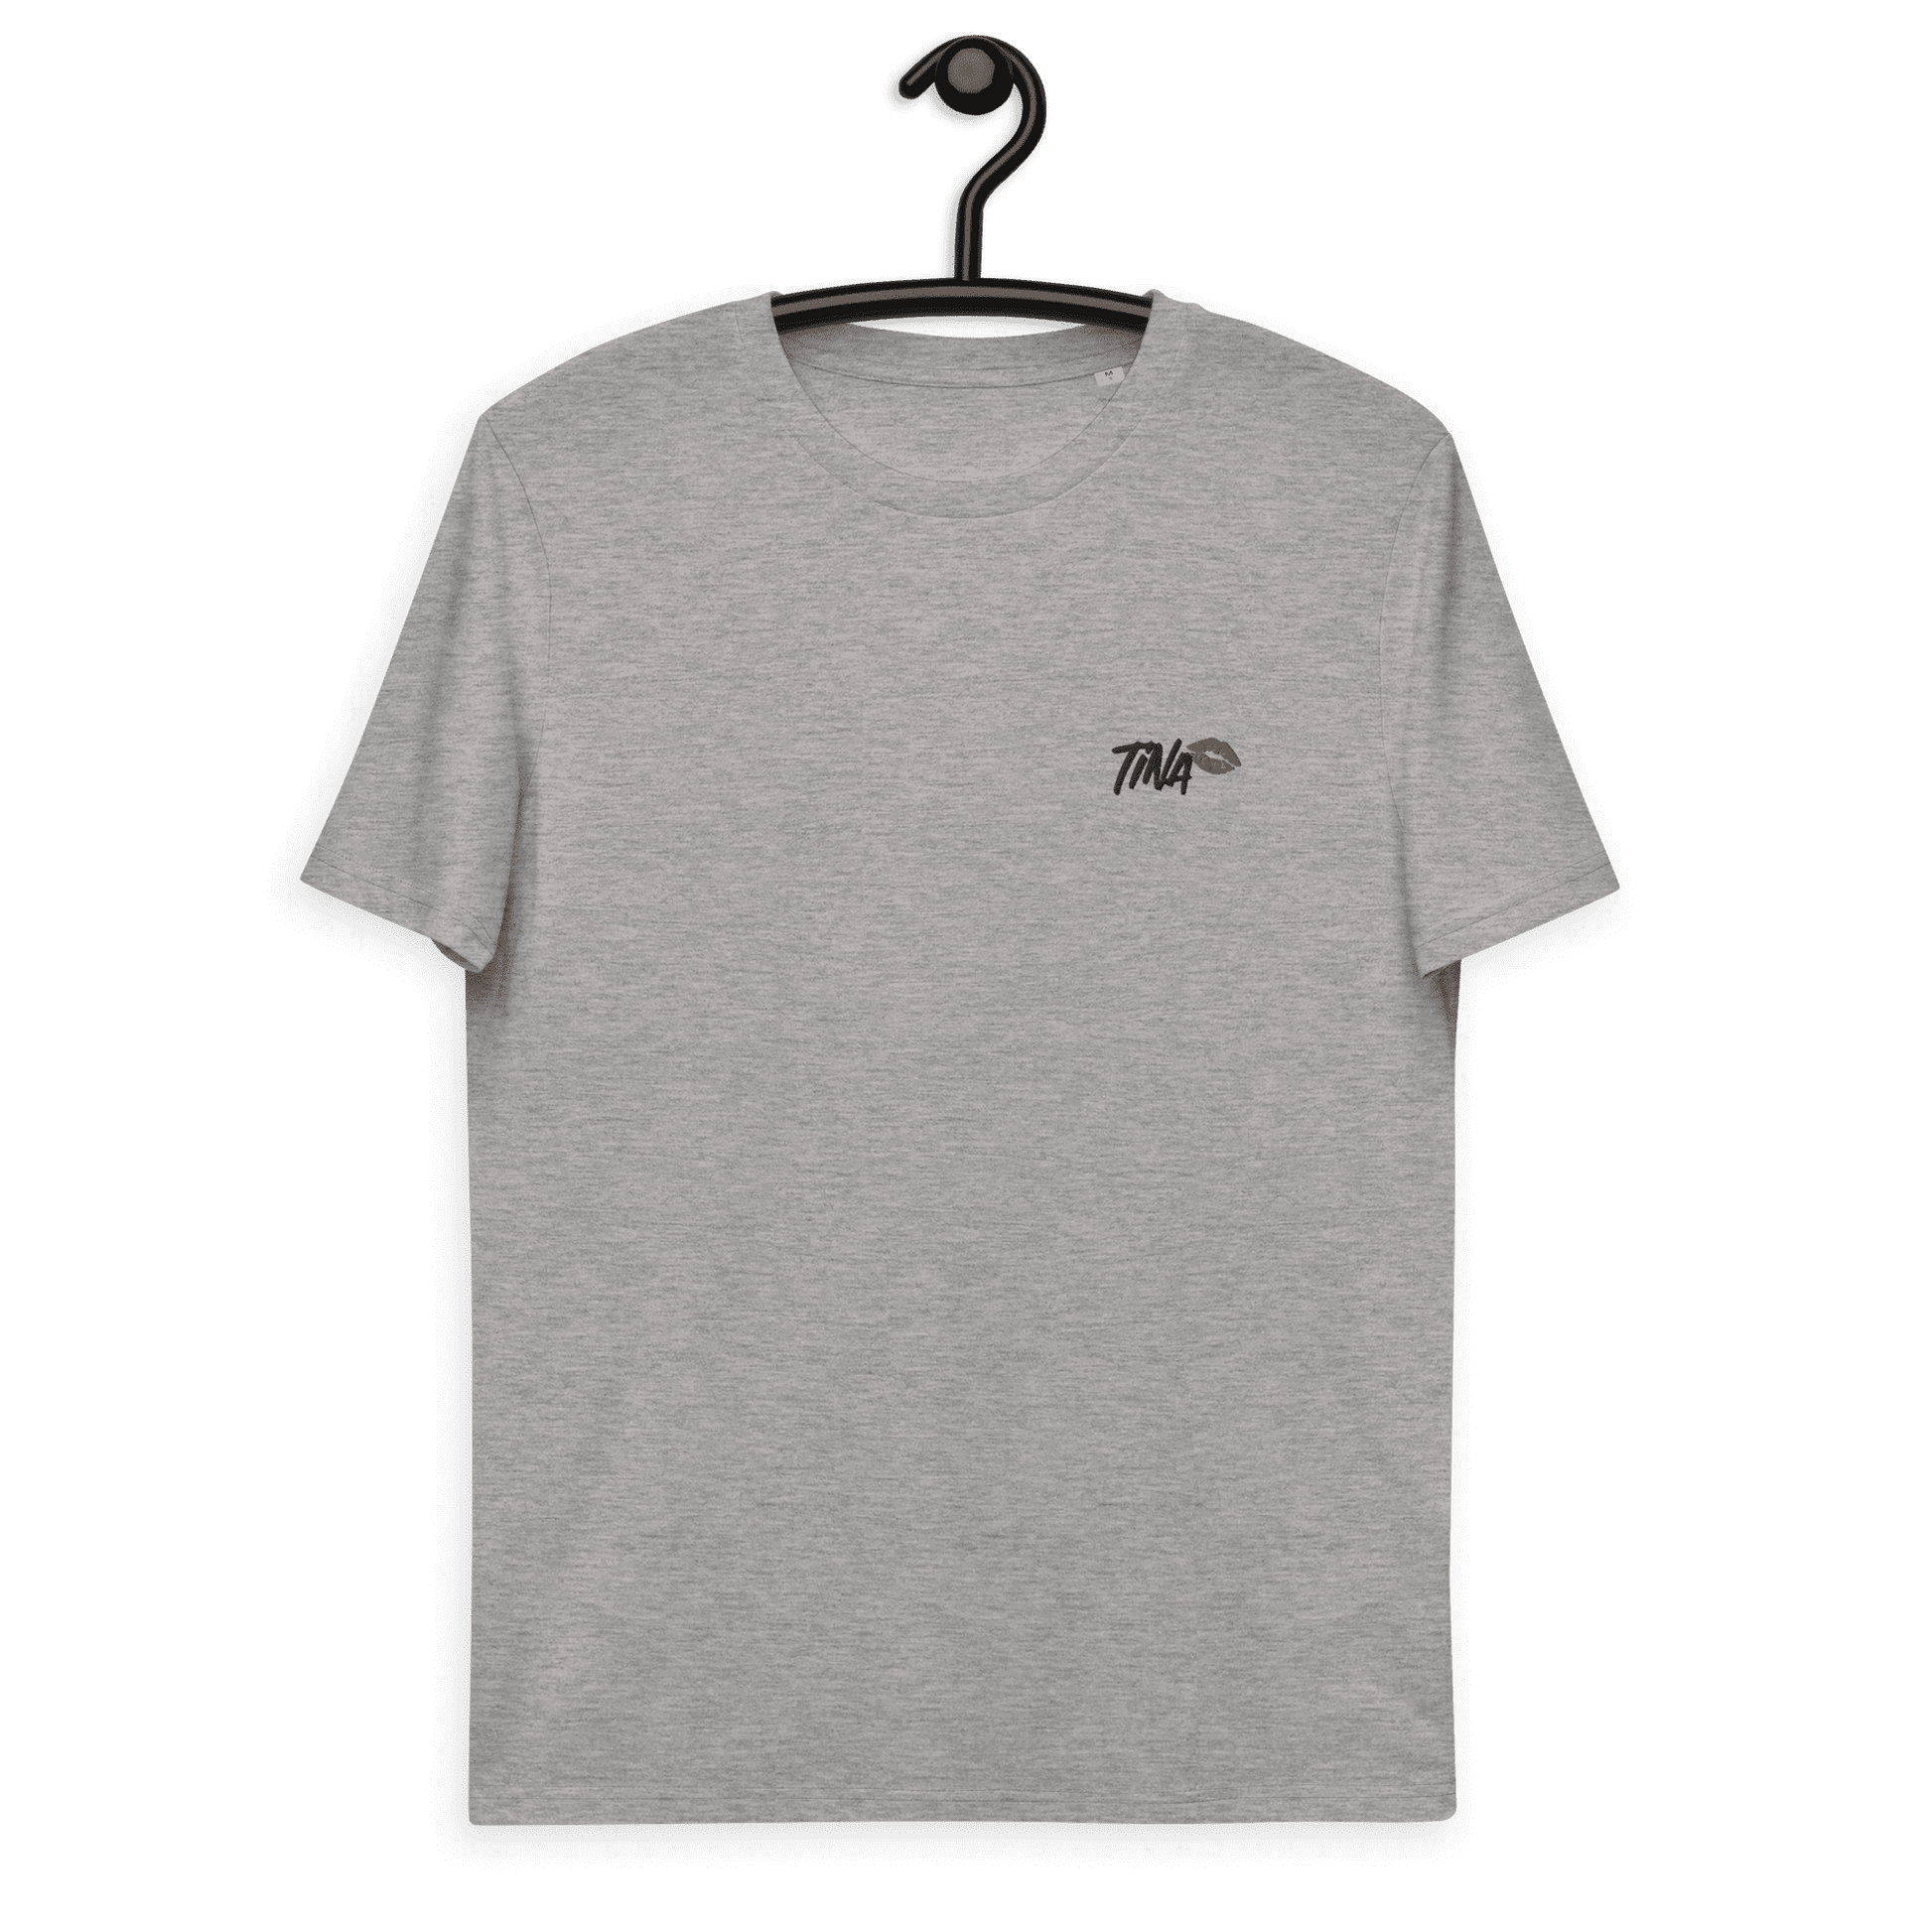 Front view of a heather grey embroidered bitcoin t-shirt.